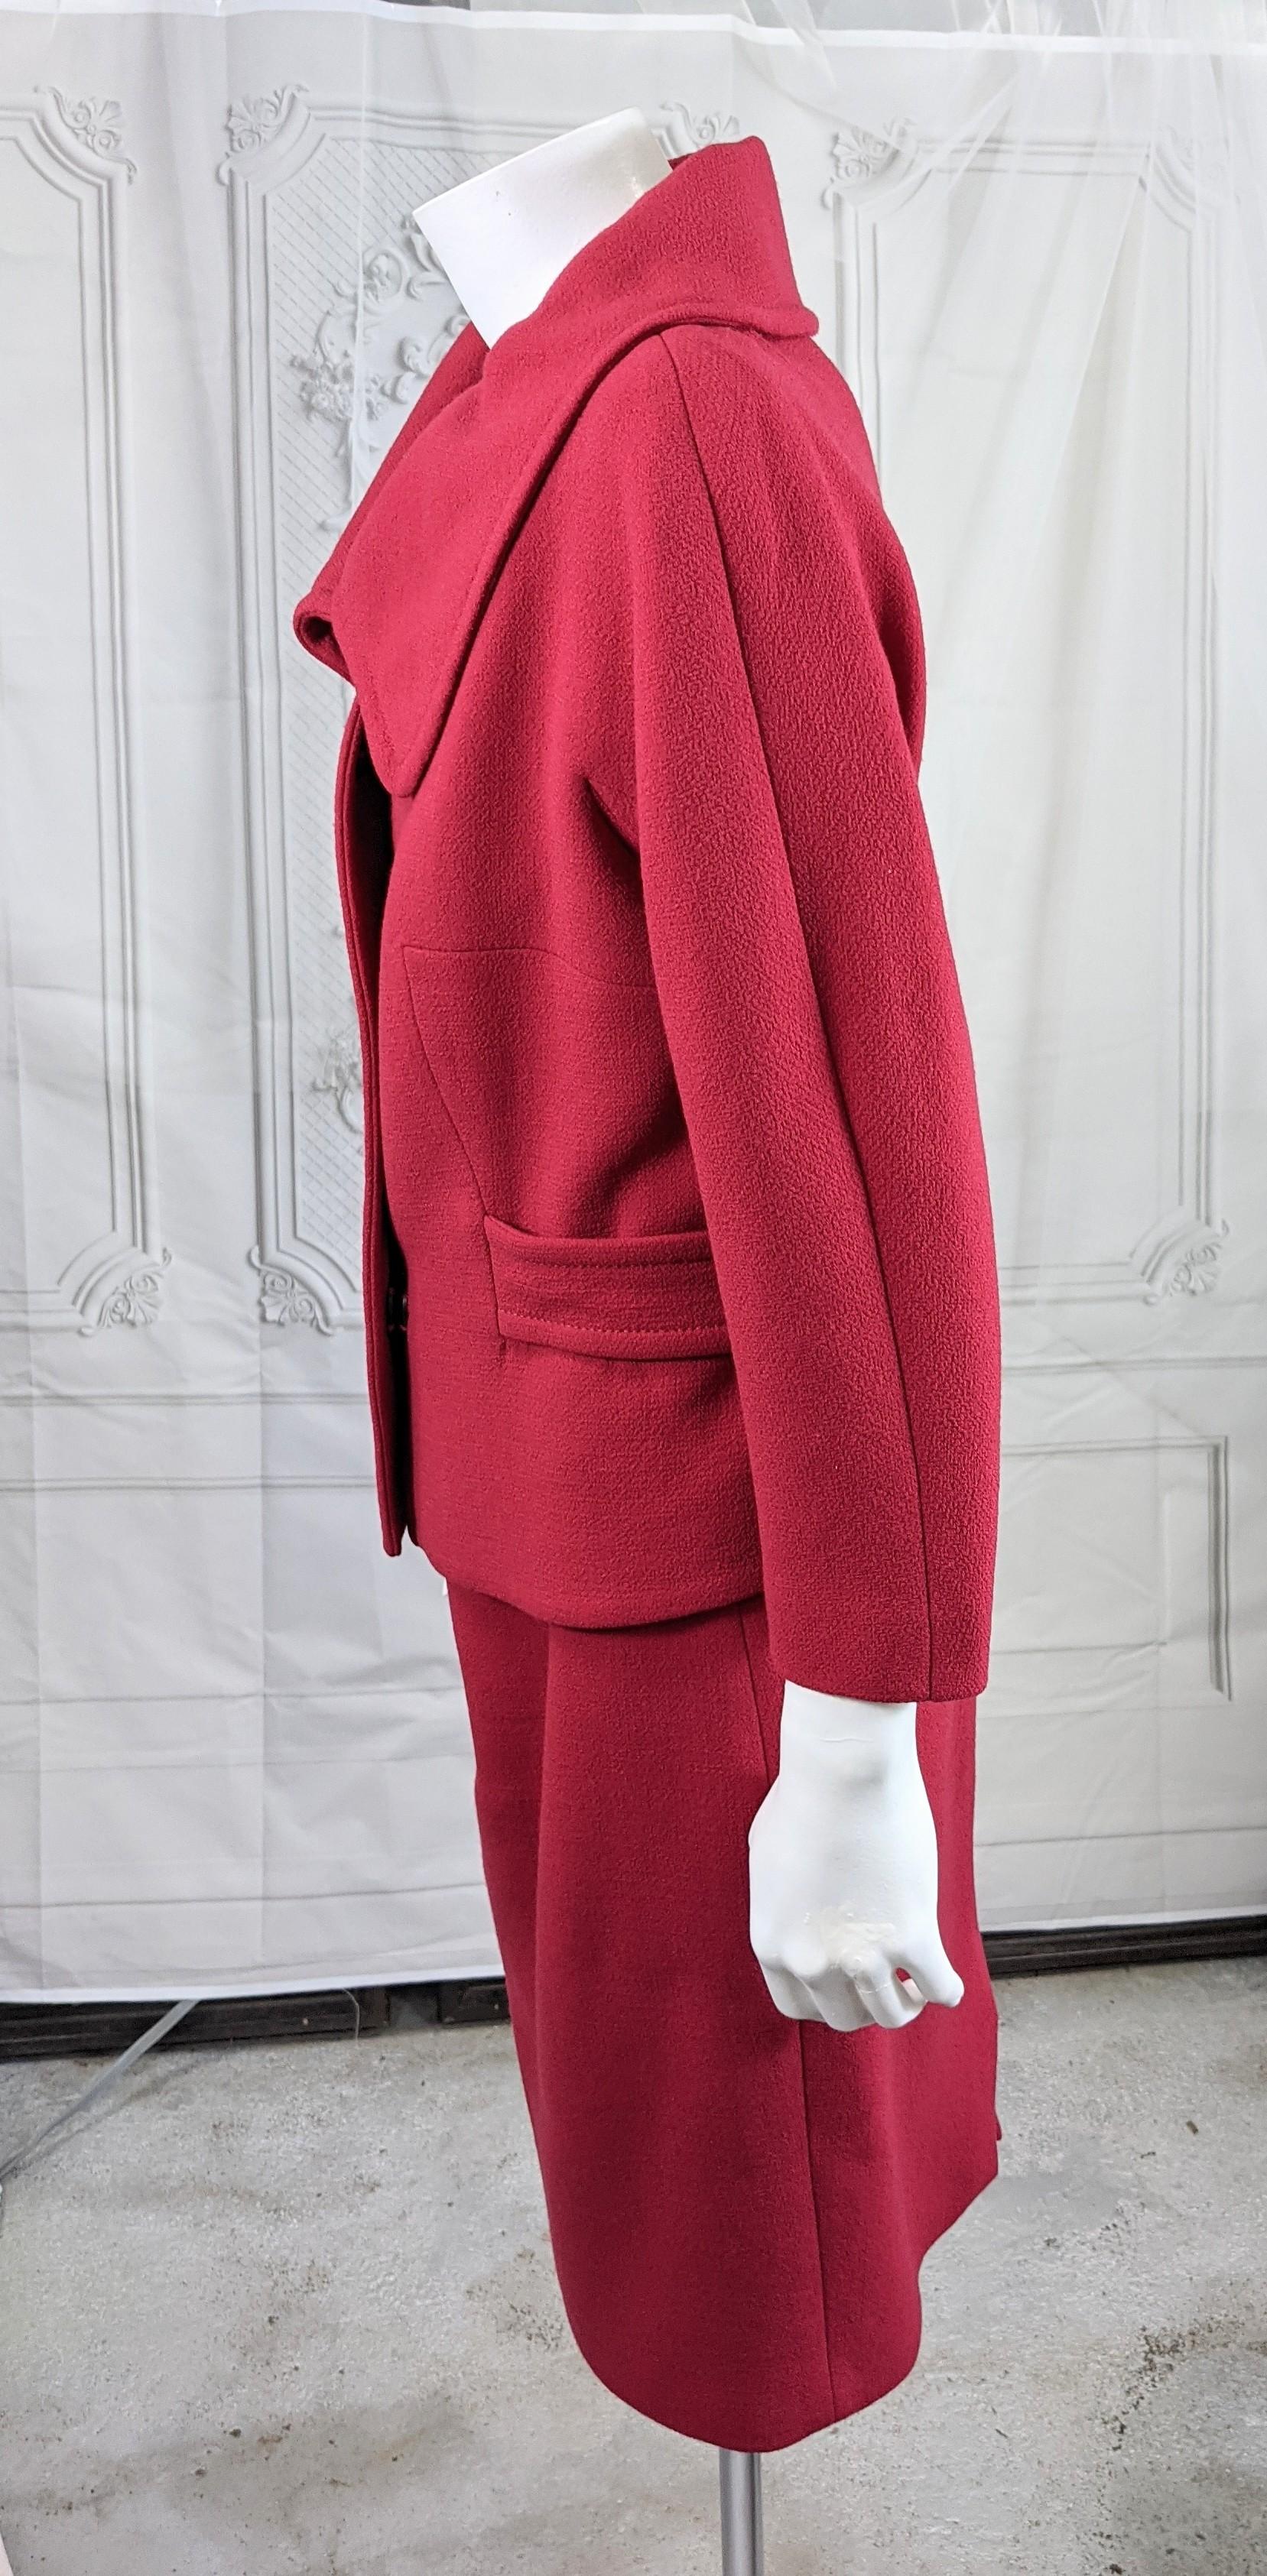 Giambatista Valli Rasberry Wool Crepe Suit In Excellent Condition For Sale In New York, NY